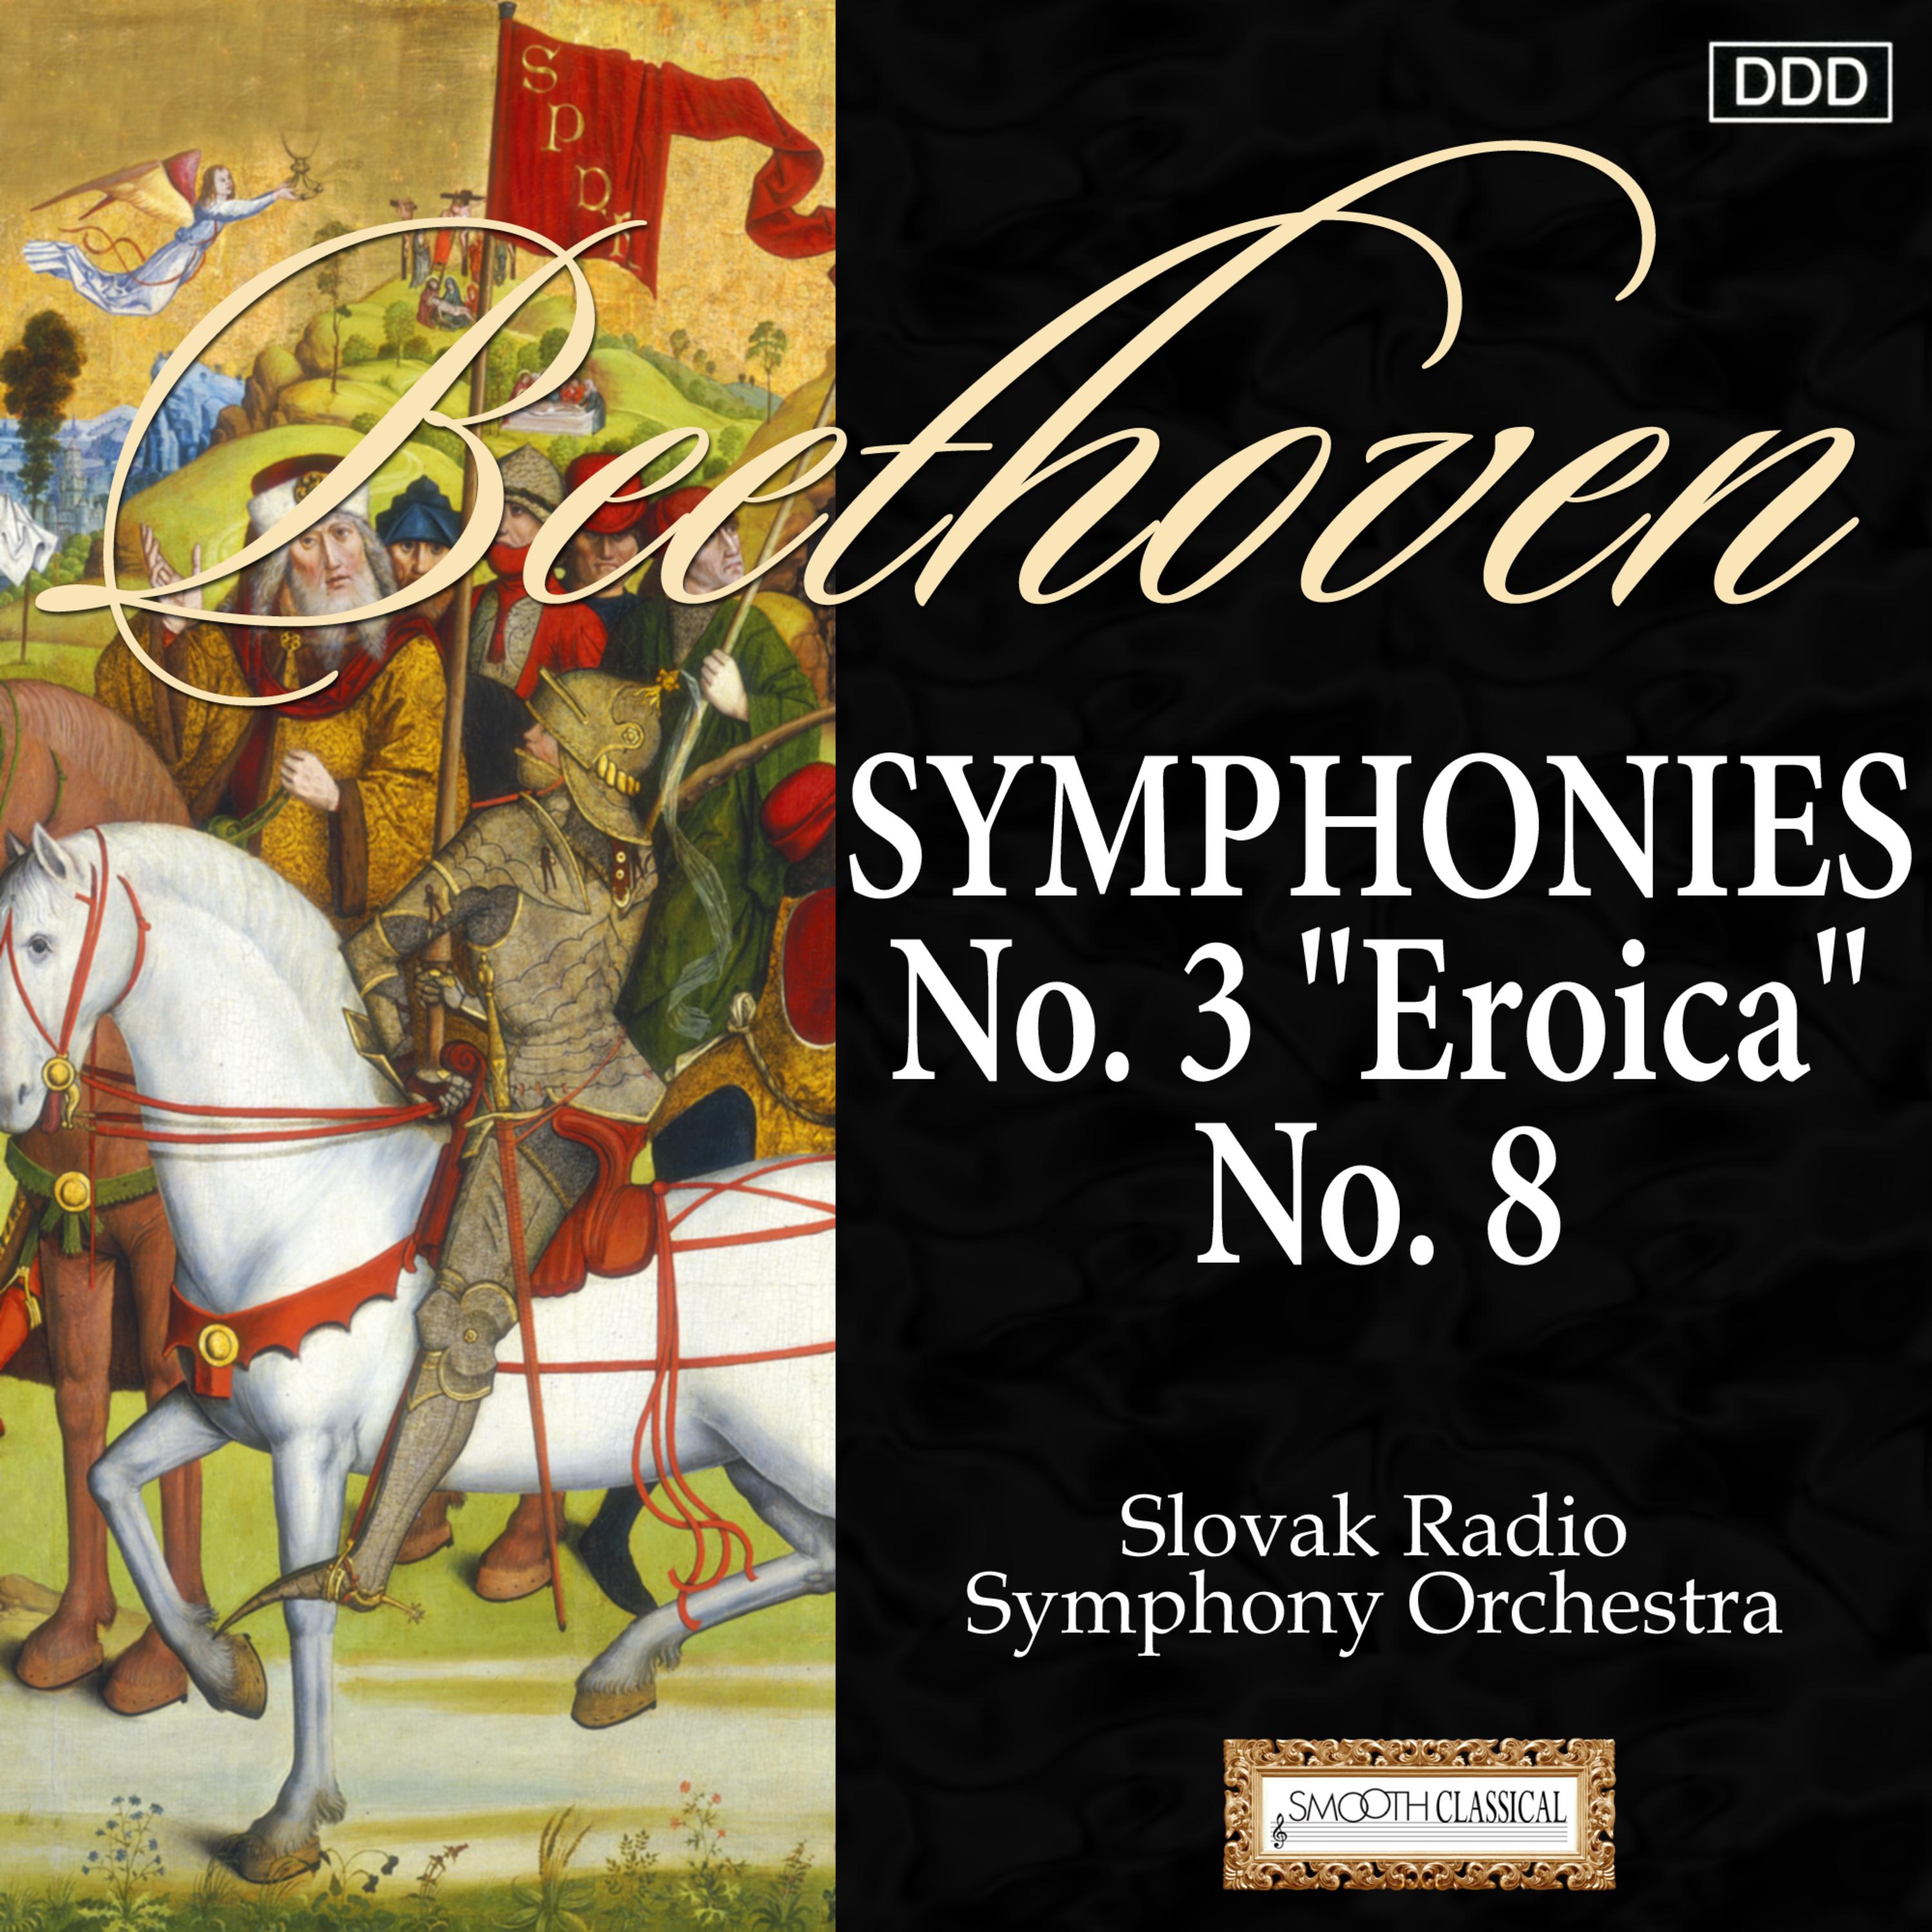 Beethoven: Symphonies Nos. 3 "Eroica" and 8